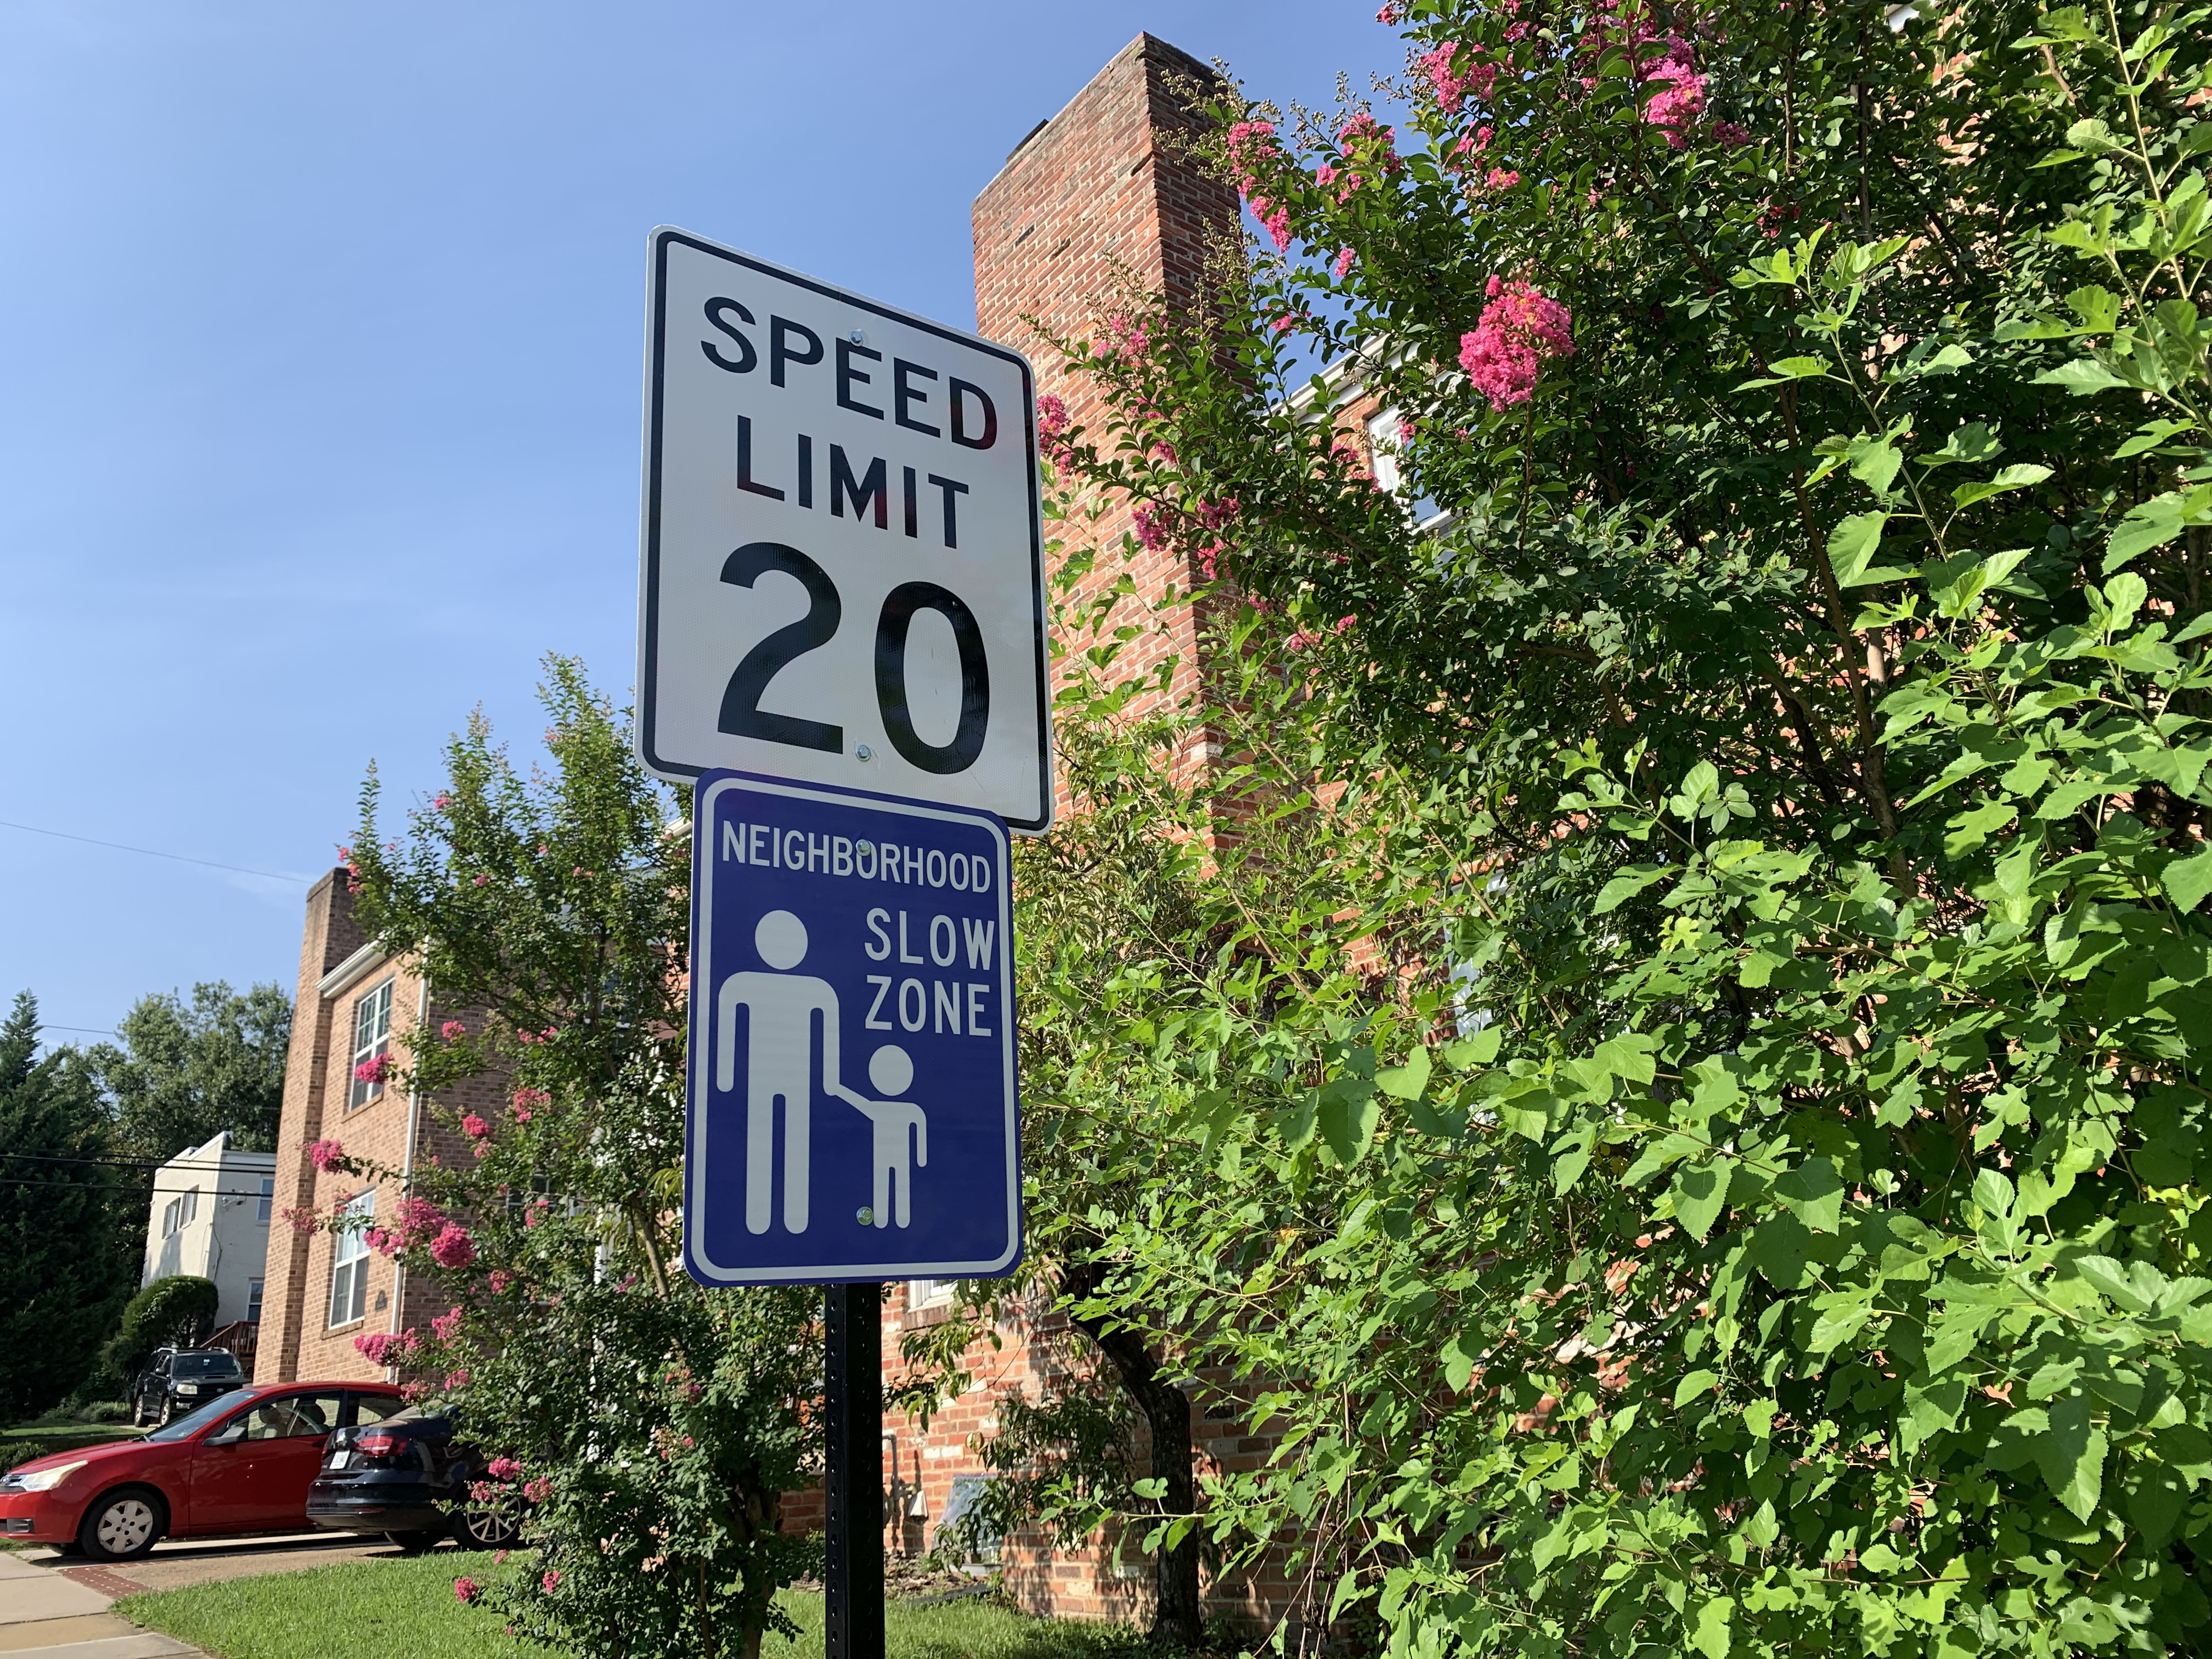 An image of a 20 MPH speed limit and neighborhood slow zone sign